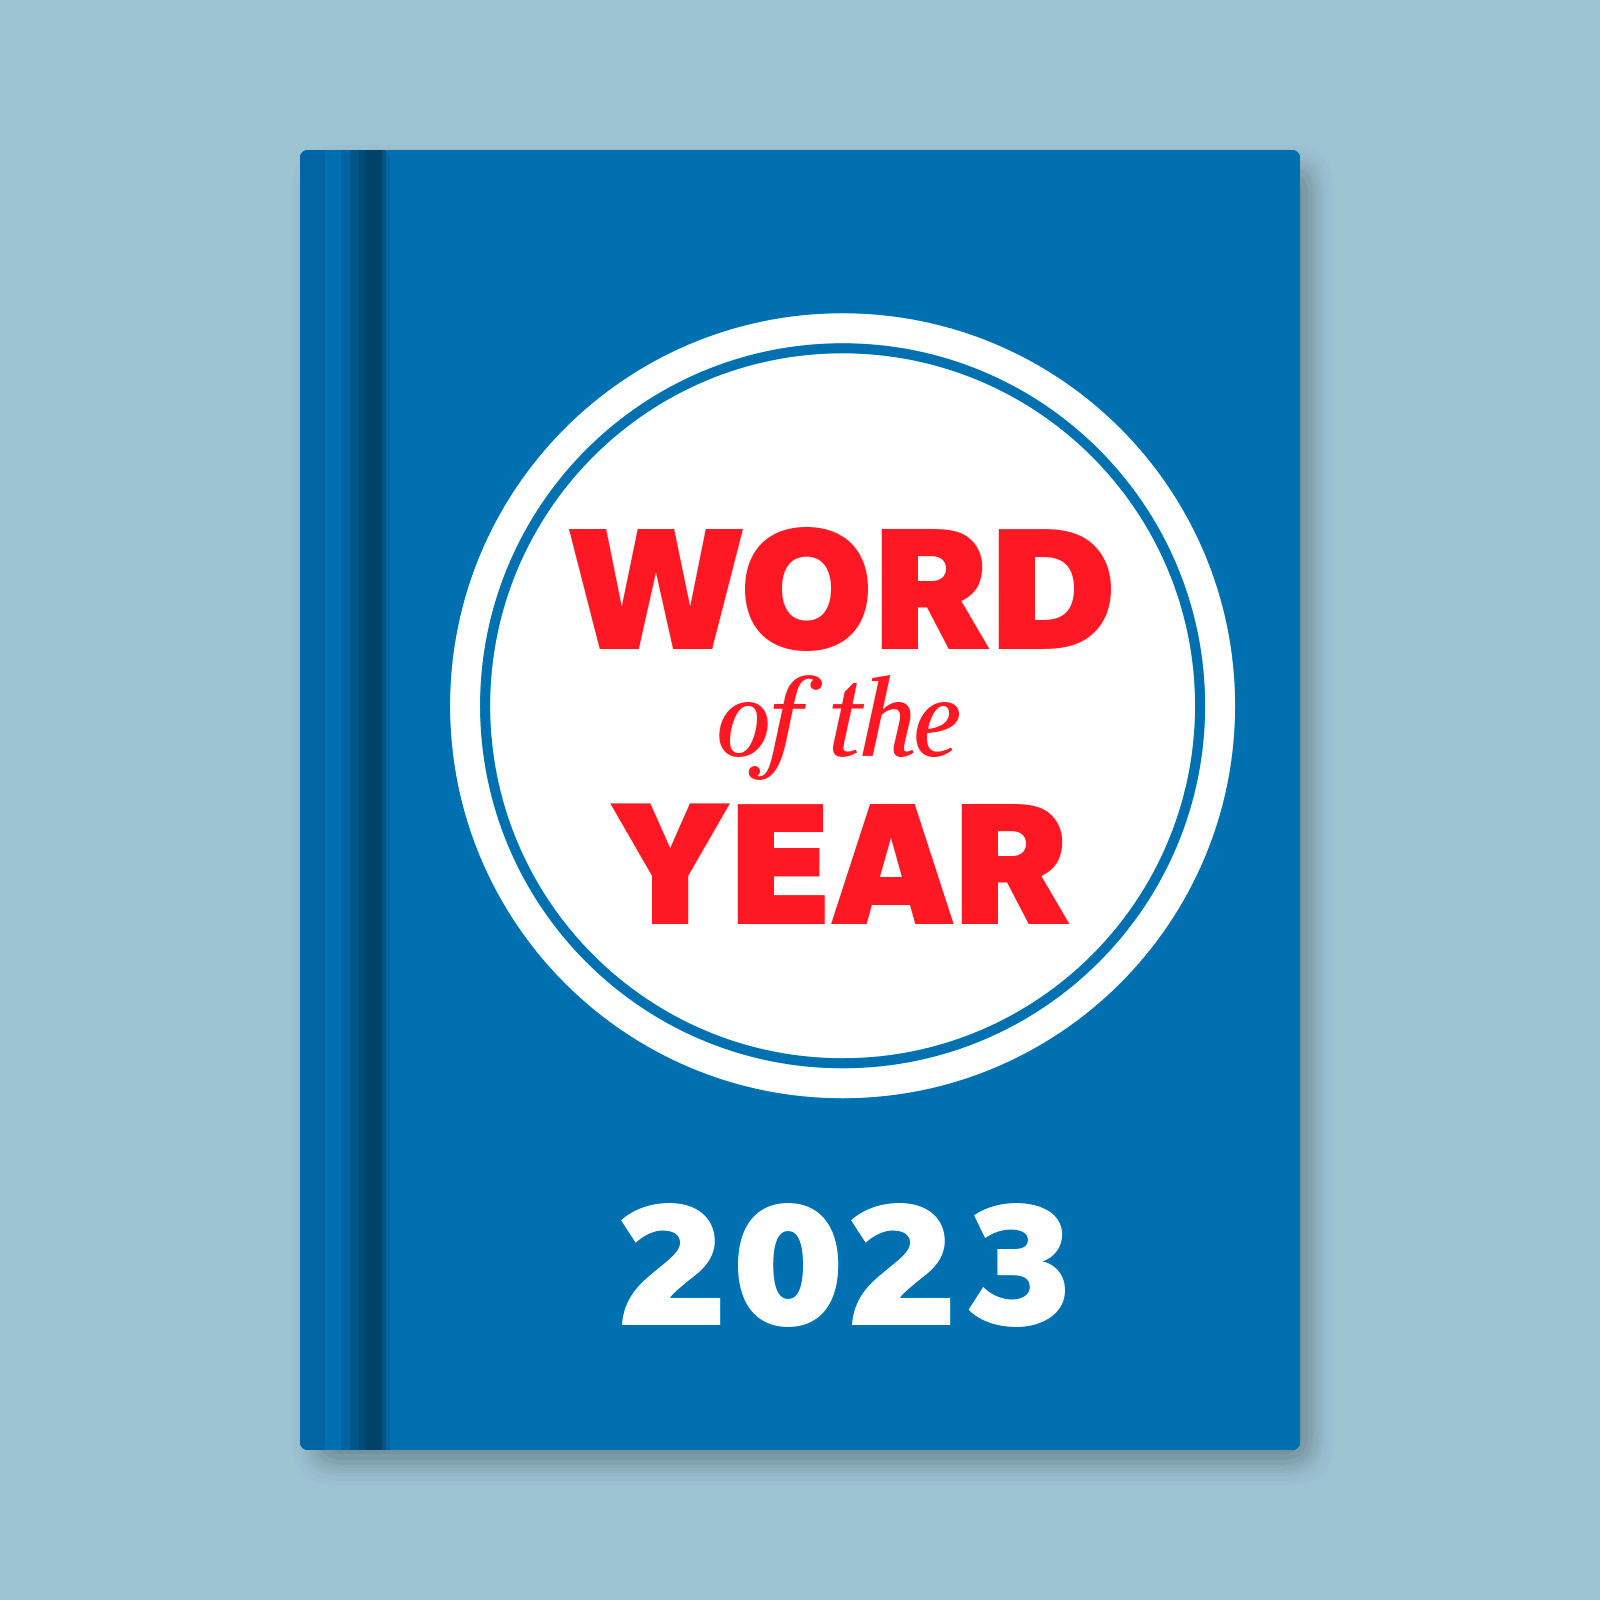 These Are the 2023 Words of the Year, According to Dictionaries